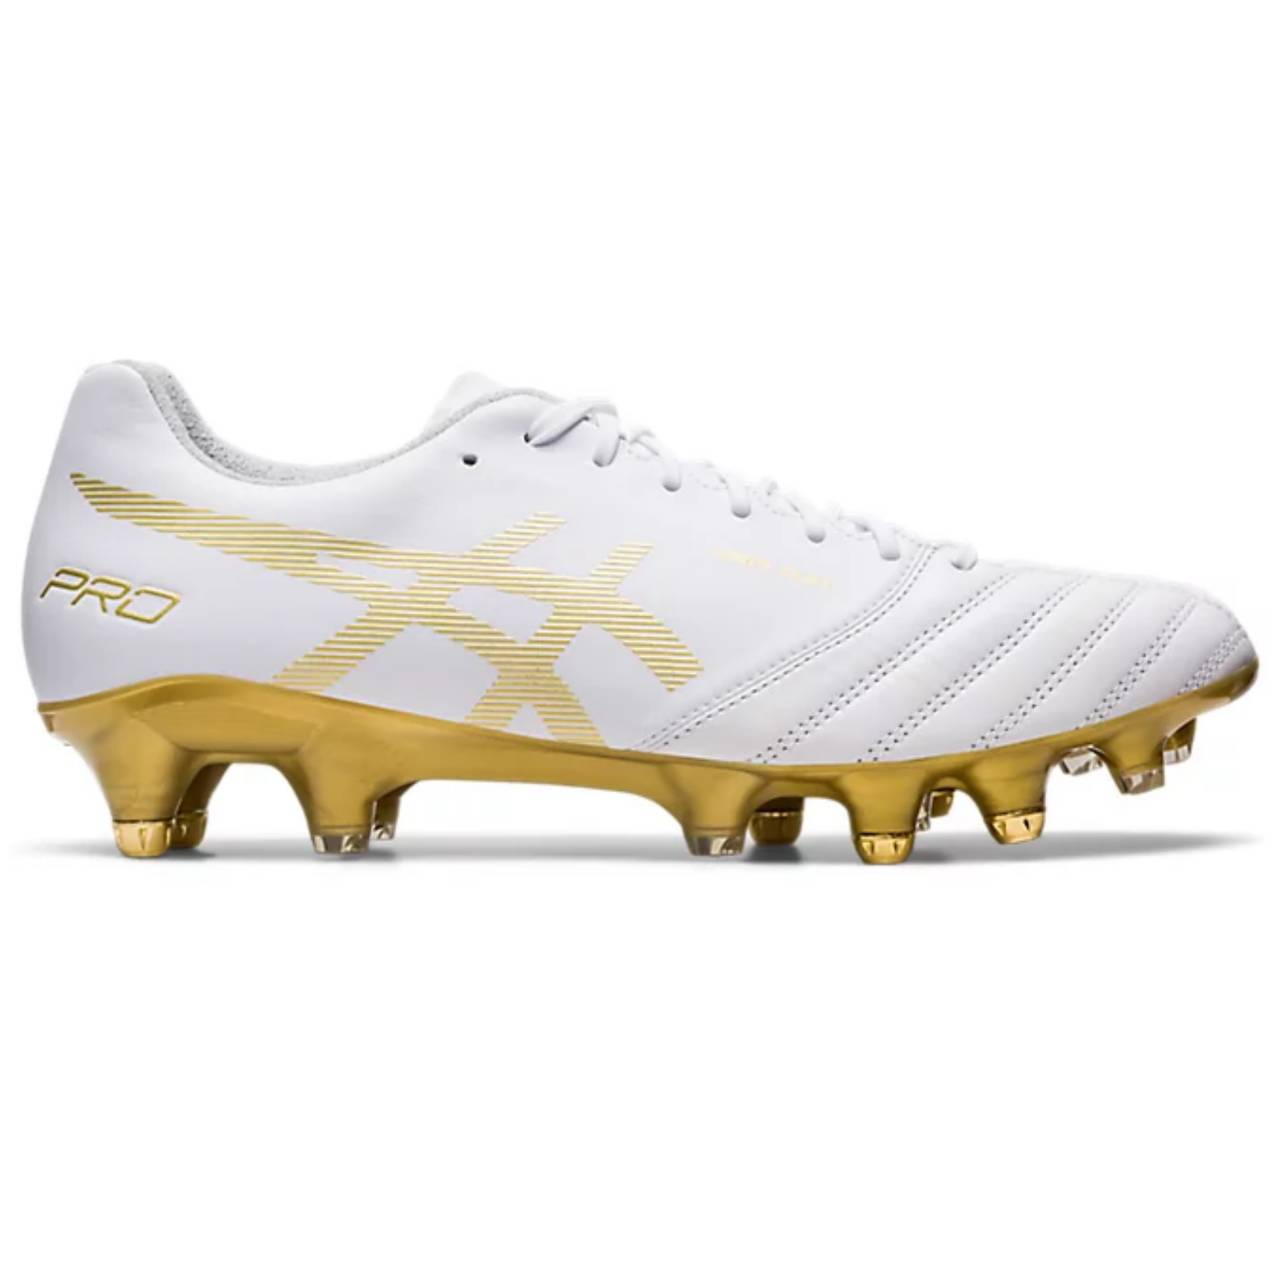 DS LIGHT X-FLY PRO ST – TRICOLOR RUGBY